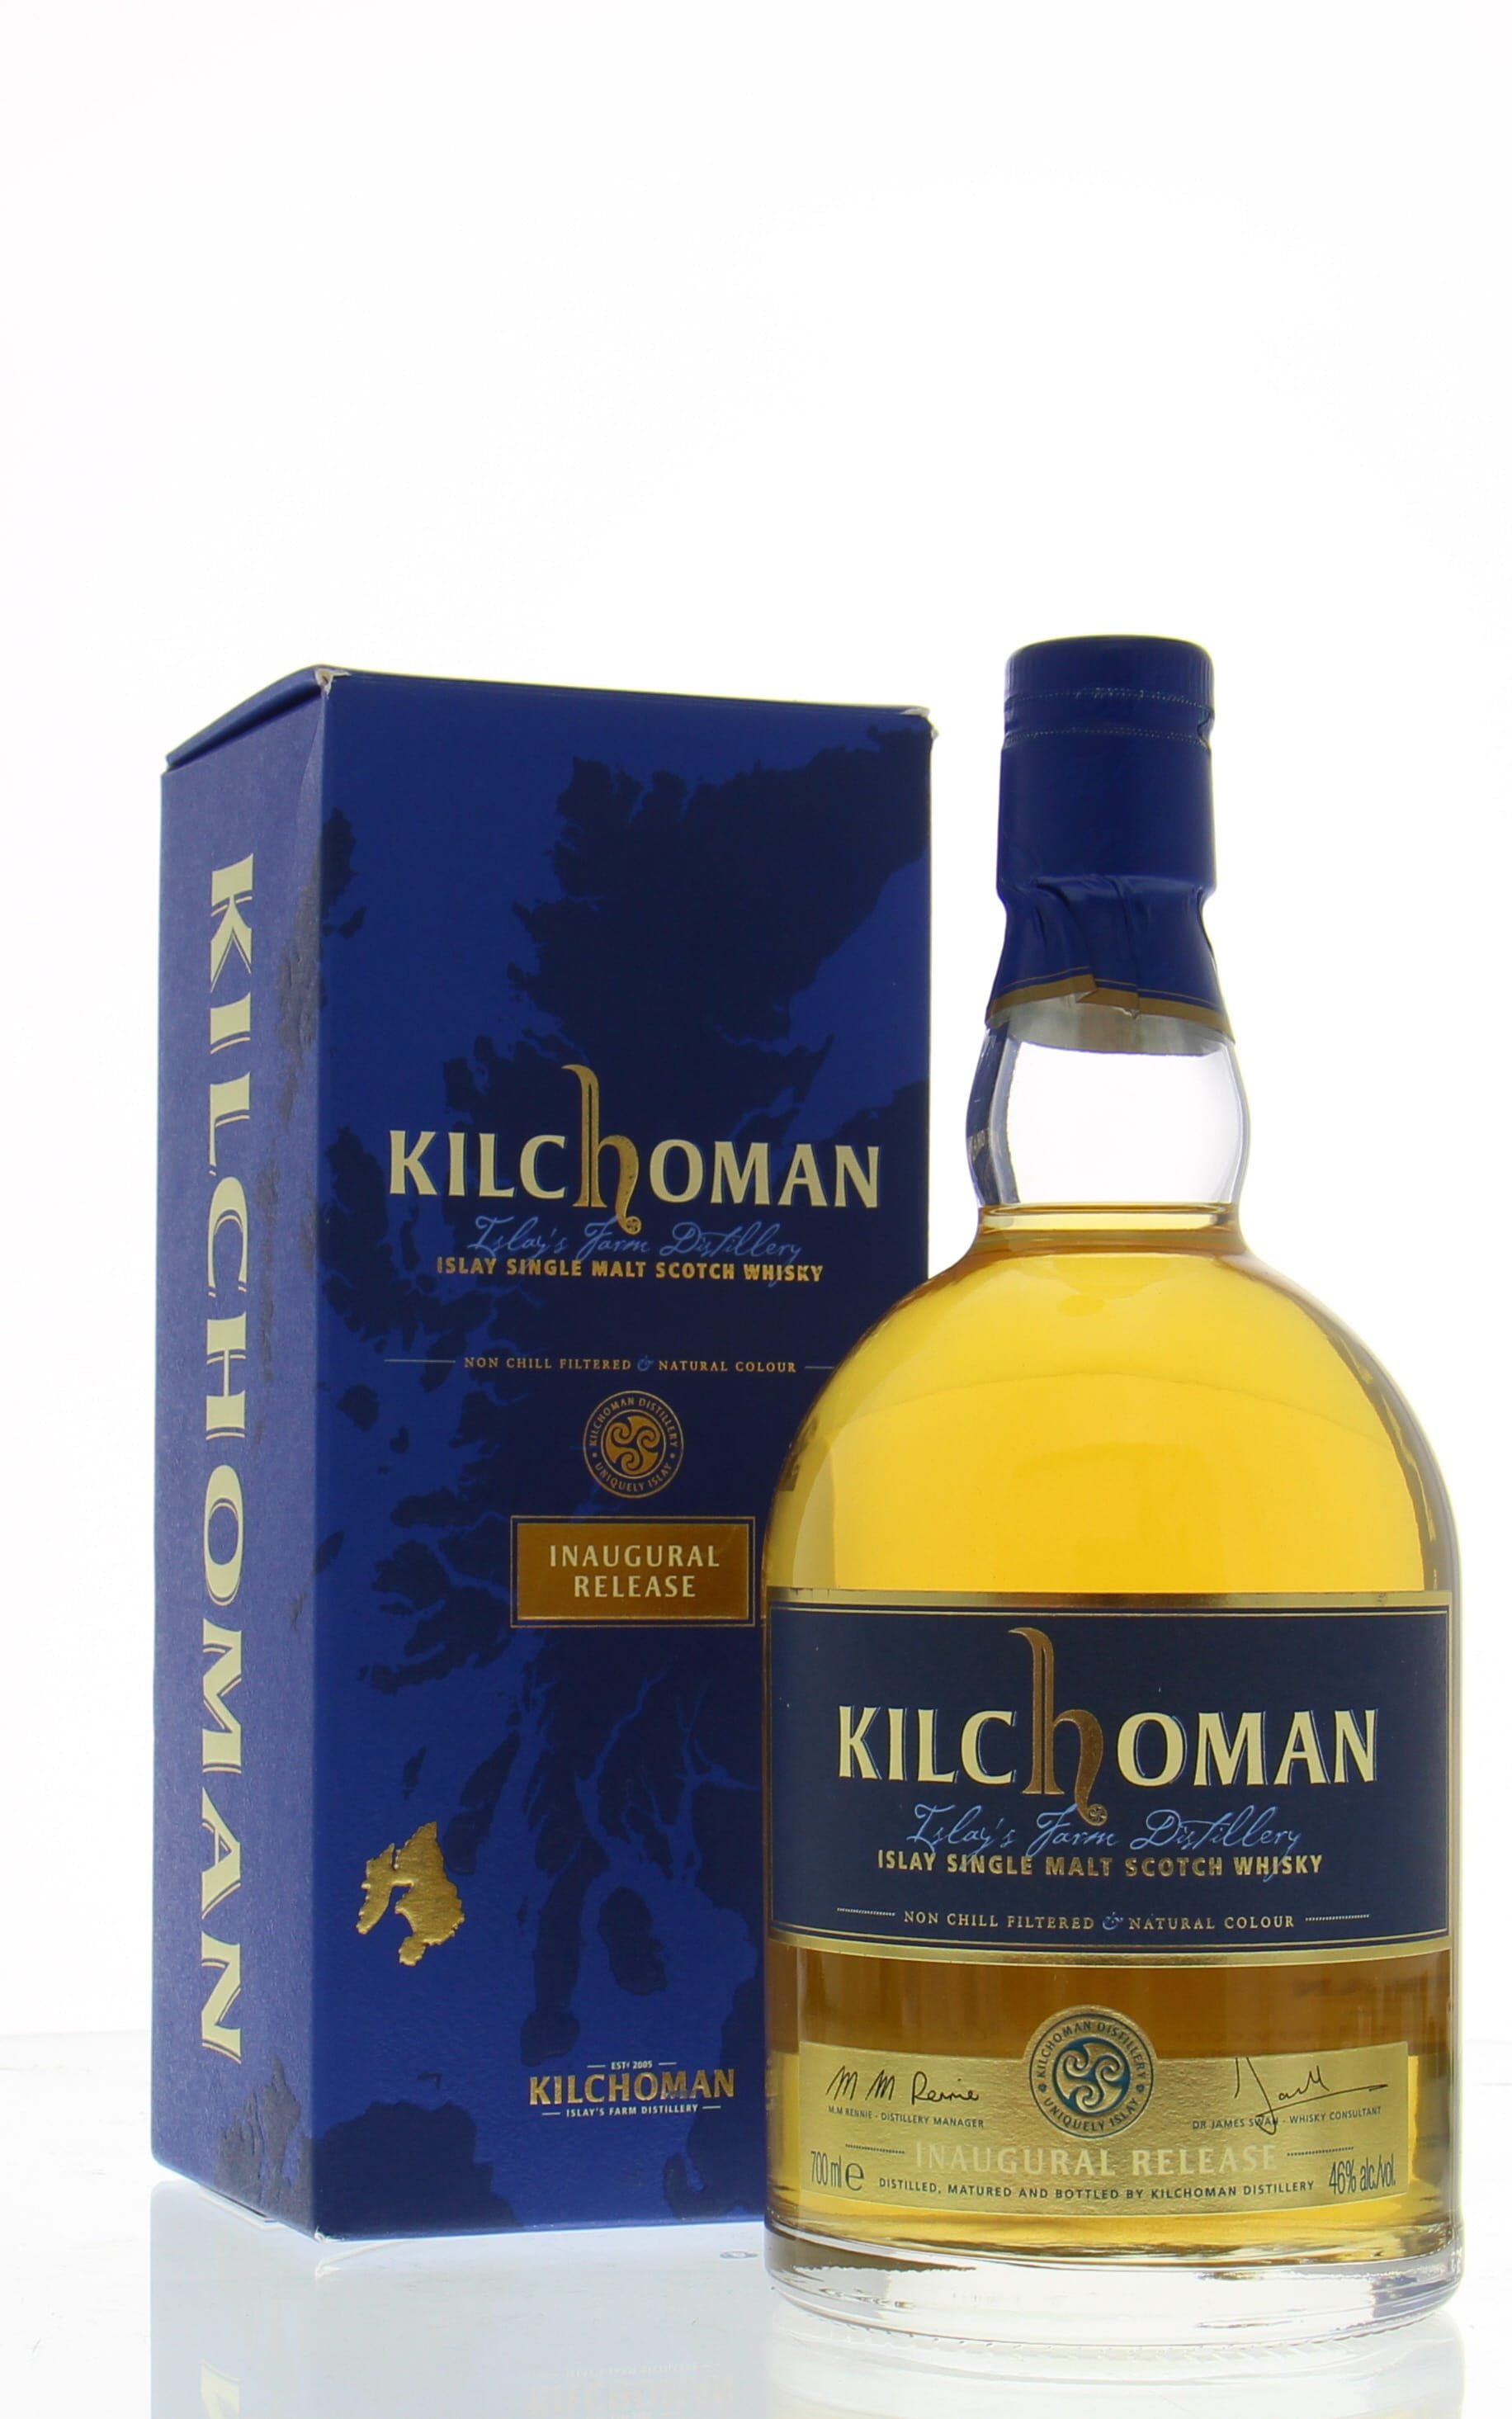 Kilchoman - 2009 Inaugural Release 3 Years Old 46% NV In Original Container